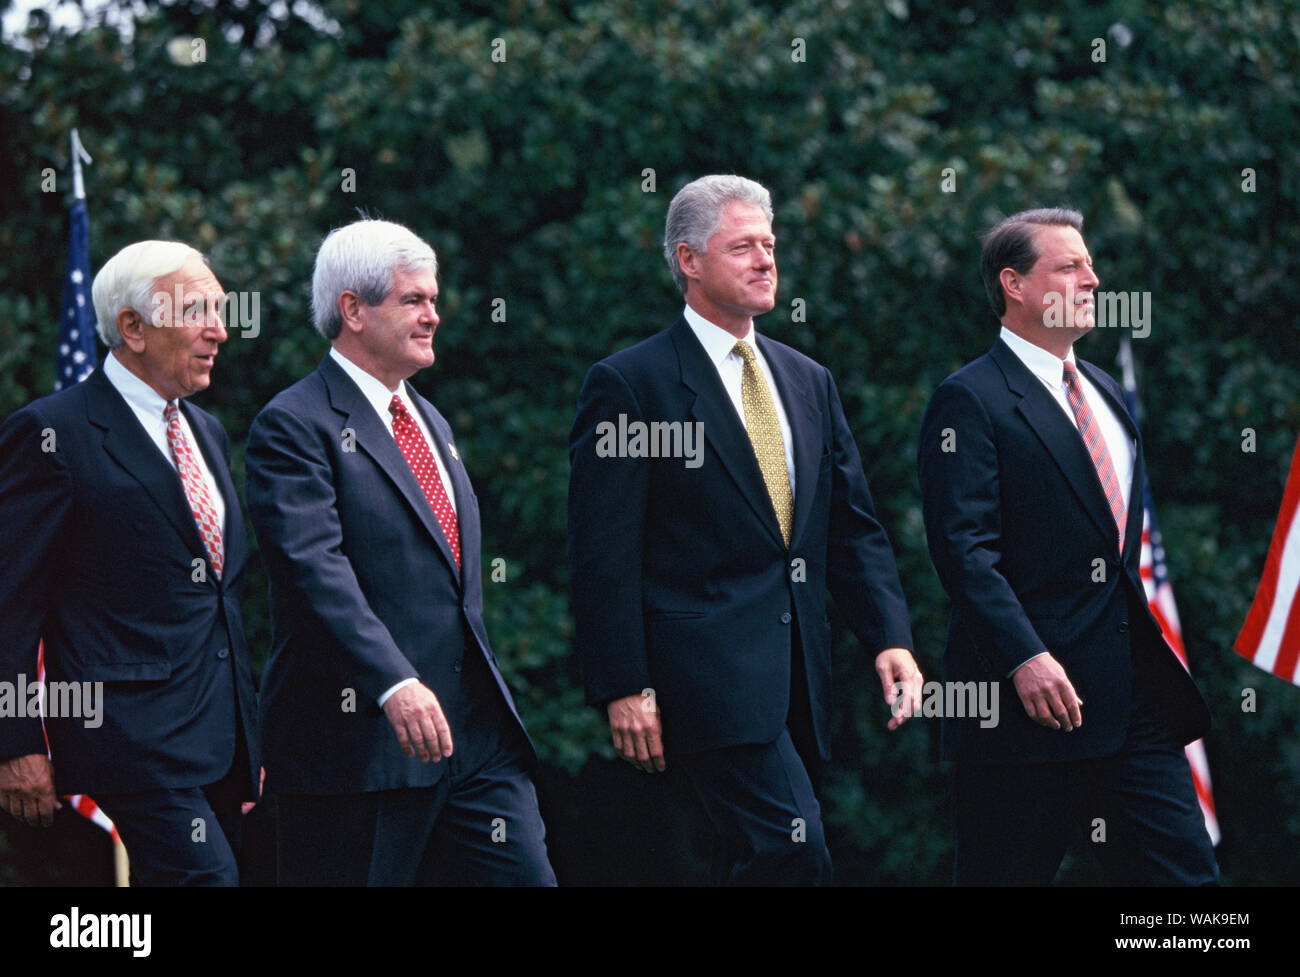 August 05, 1997. Washington, D.C. President Clinton walks to table on the South Lawn of the White House to sign a bill on a balanced budget. (left to right: Senator Frank Lautenberg, Speaker Newt Gingrich, President Clinton, VP Al Gore) Stock Photo